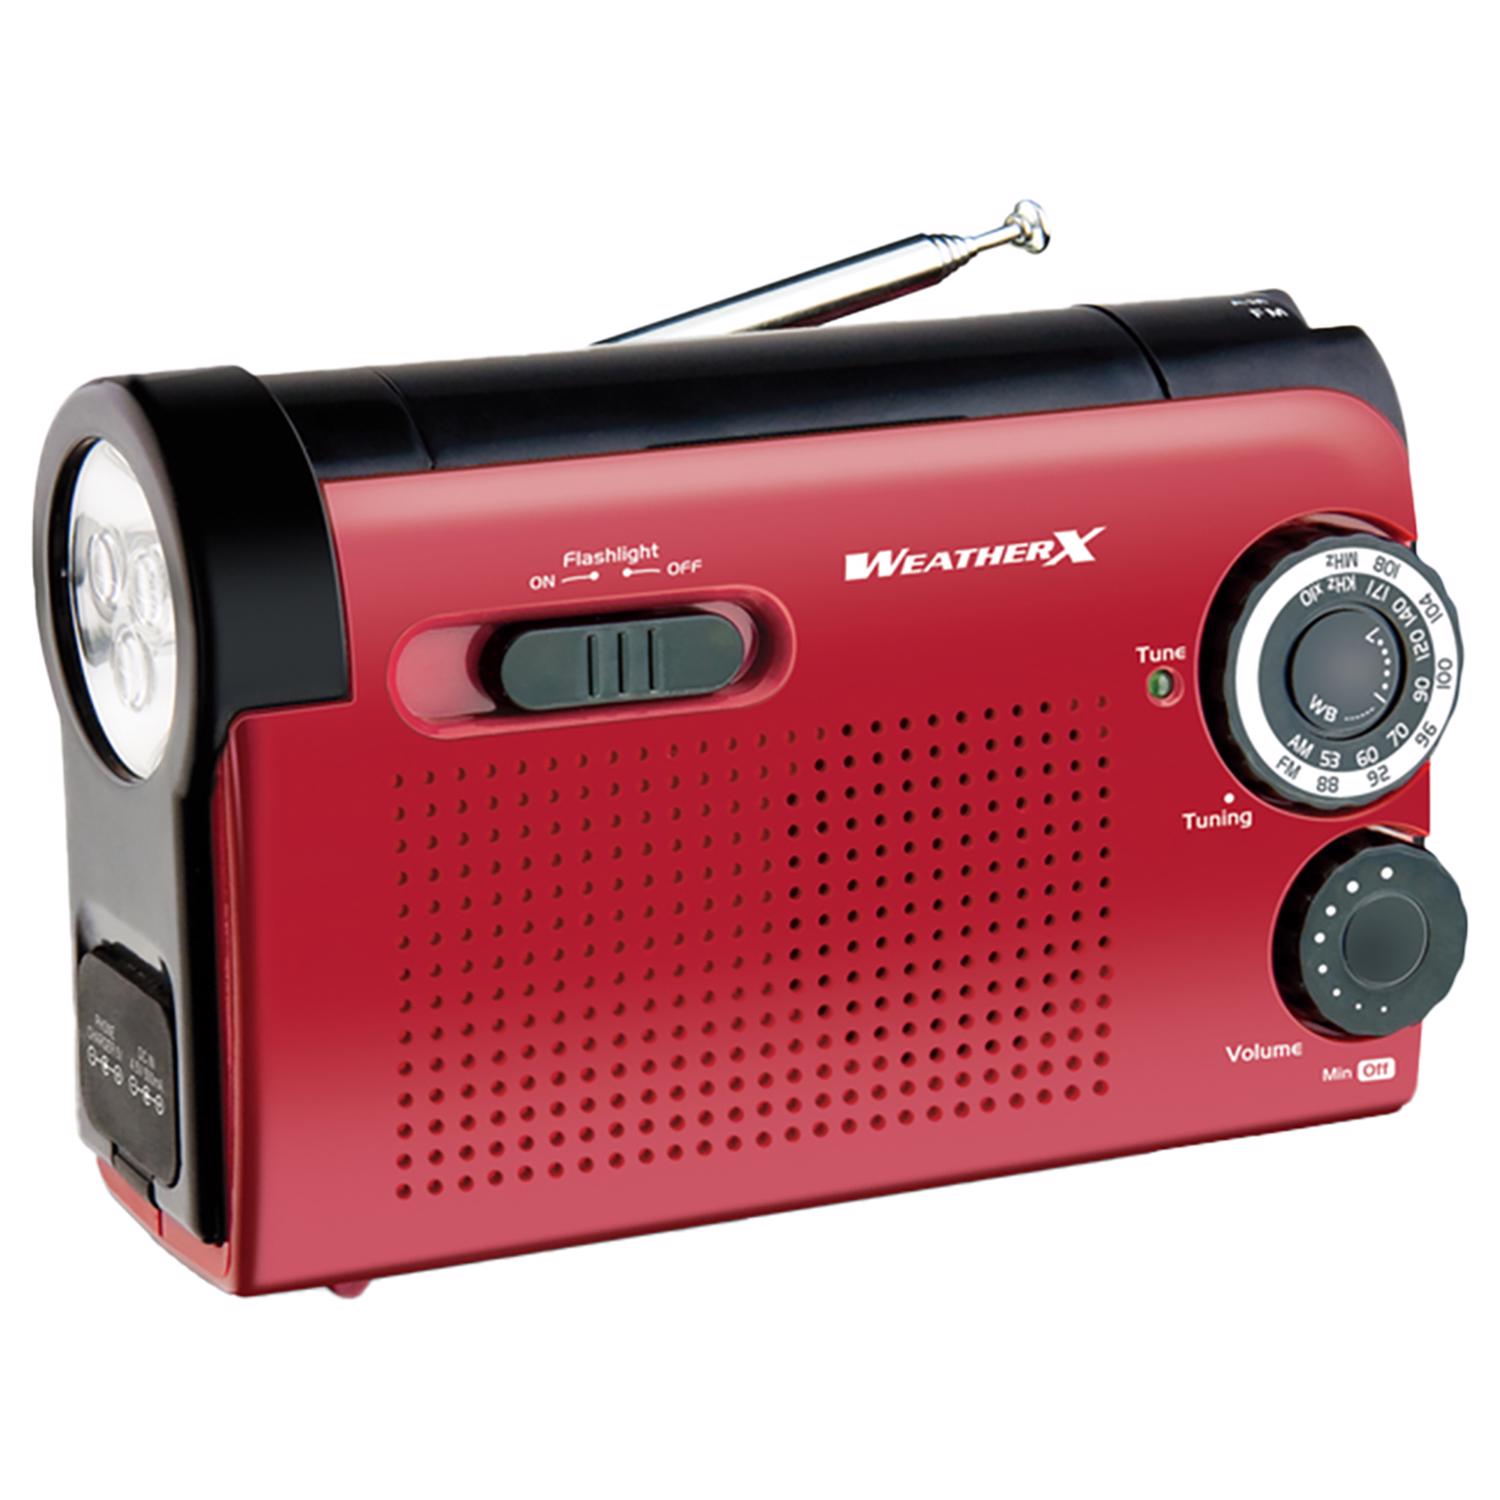 Photos - Torch WeatherX 3000 lm Red LED Weather Alert Radio Flashlight AA Battery WR182R